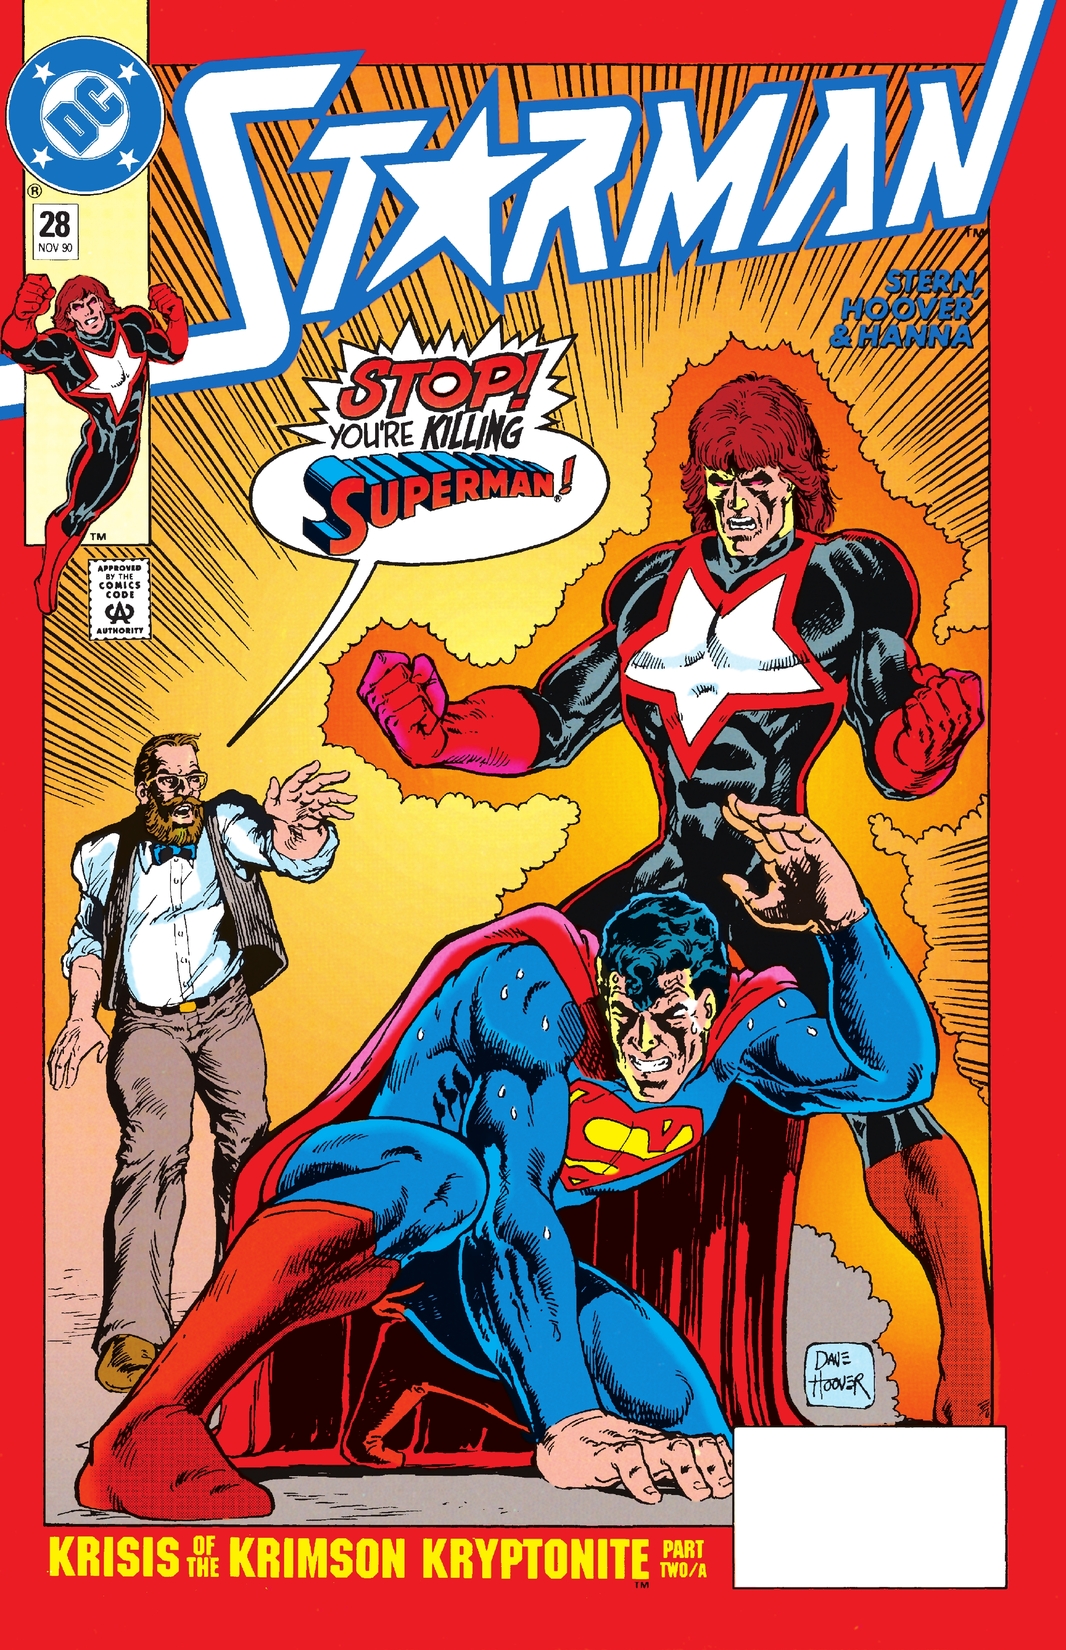 Starman (1988-) #28 preview images